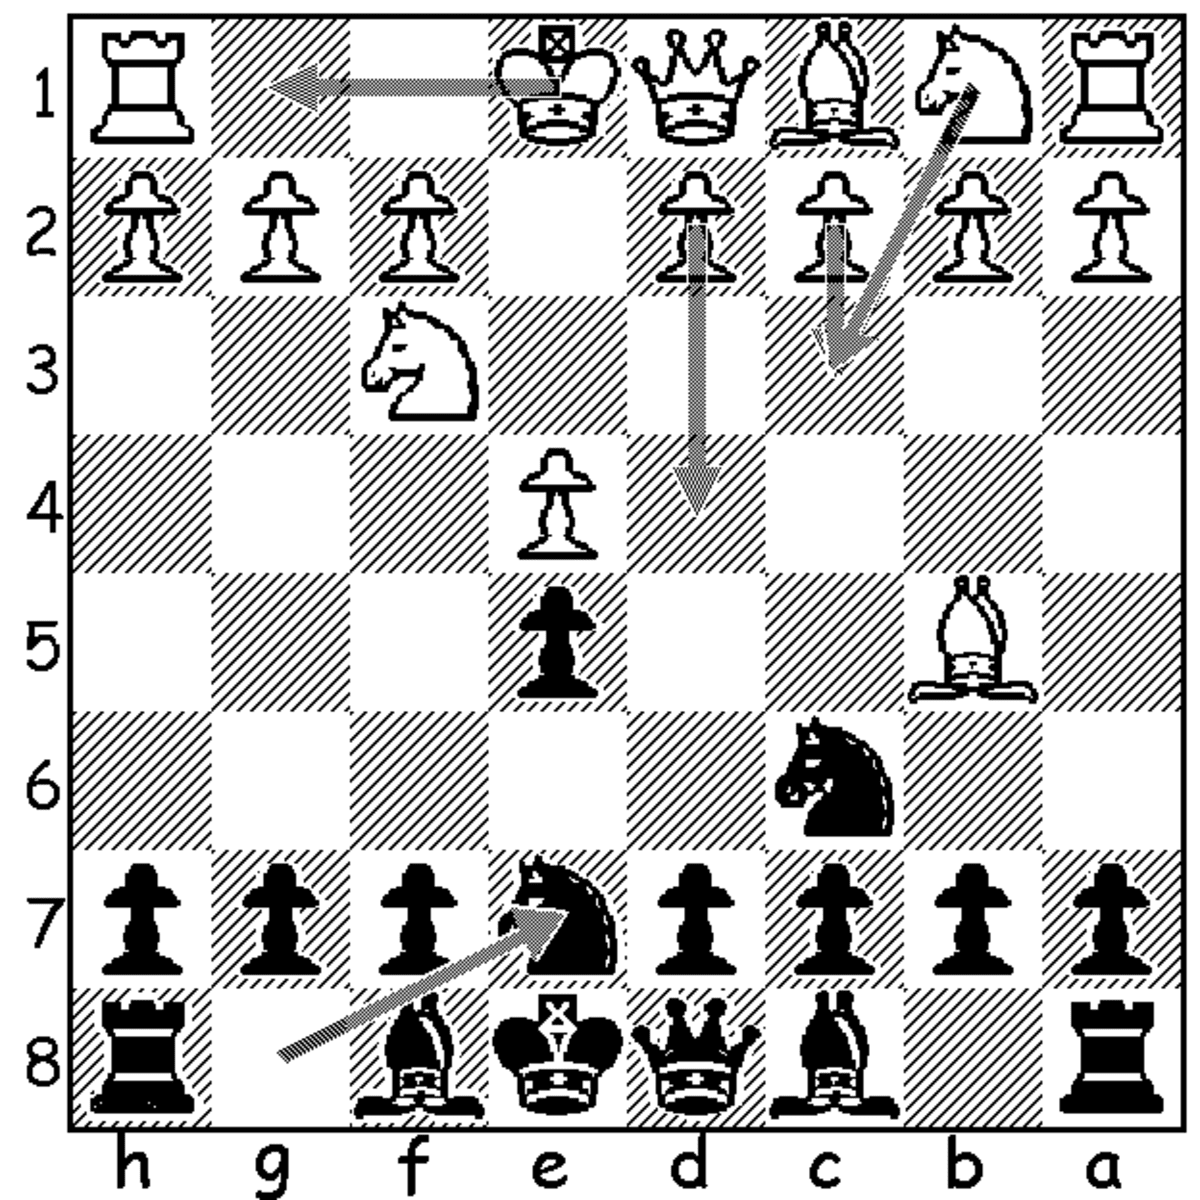 The Ruy Lopez Opening: How to Play It as White and Black